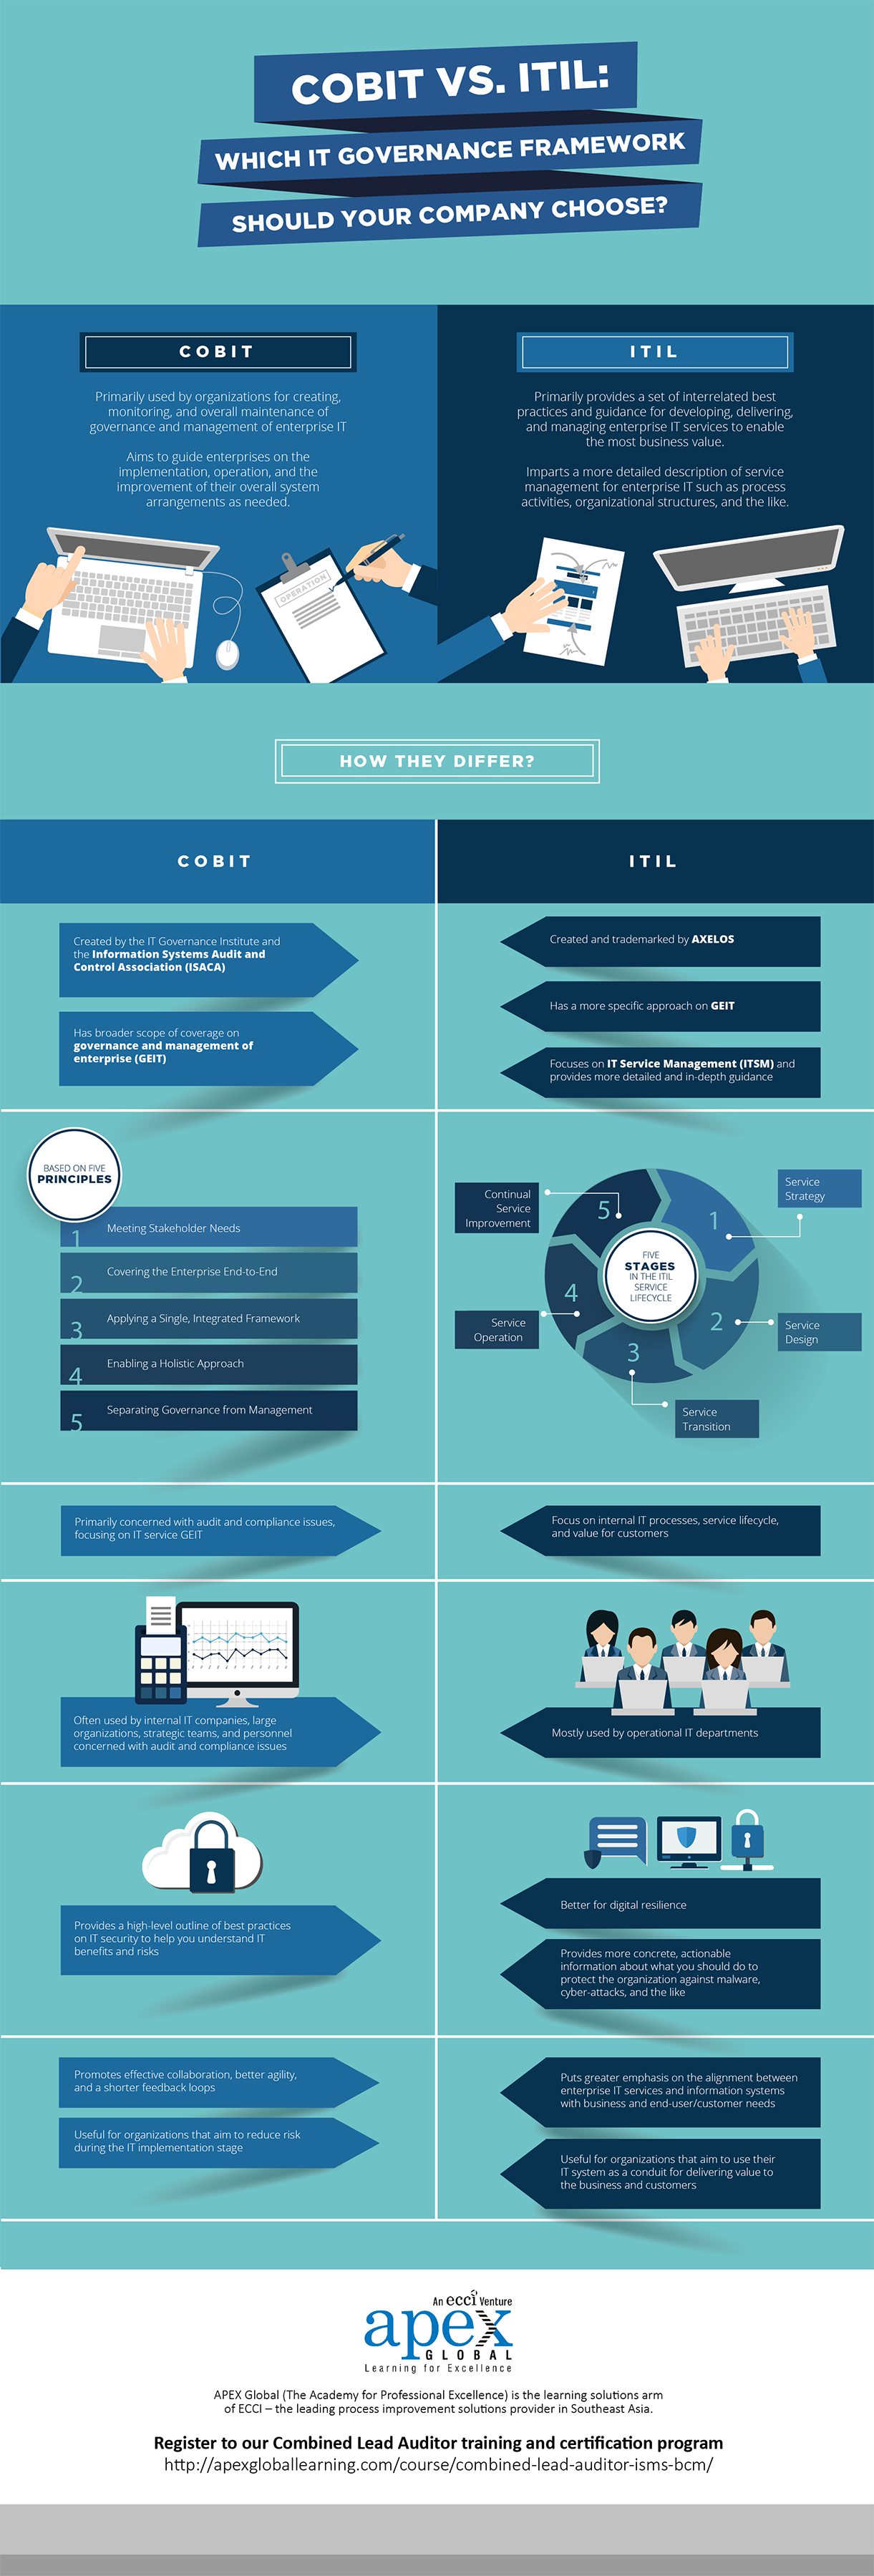 cobit-vs-itil-which-it-governance-framework-should-your-company-choose-infographic-01